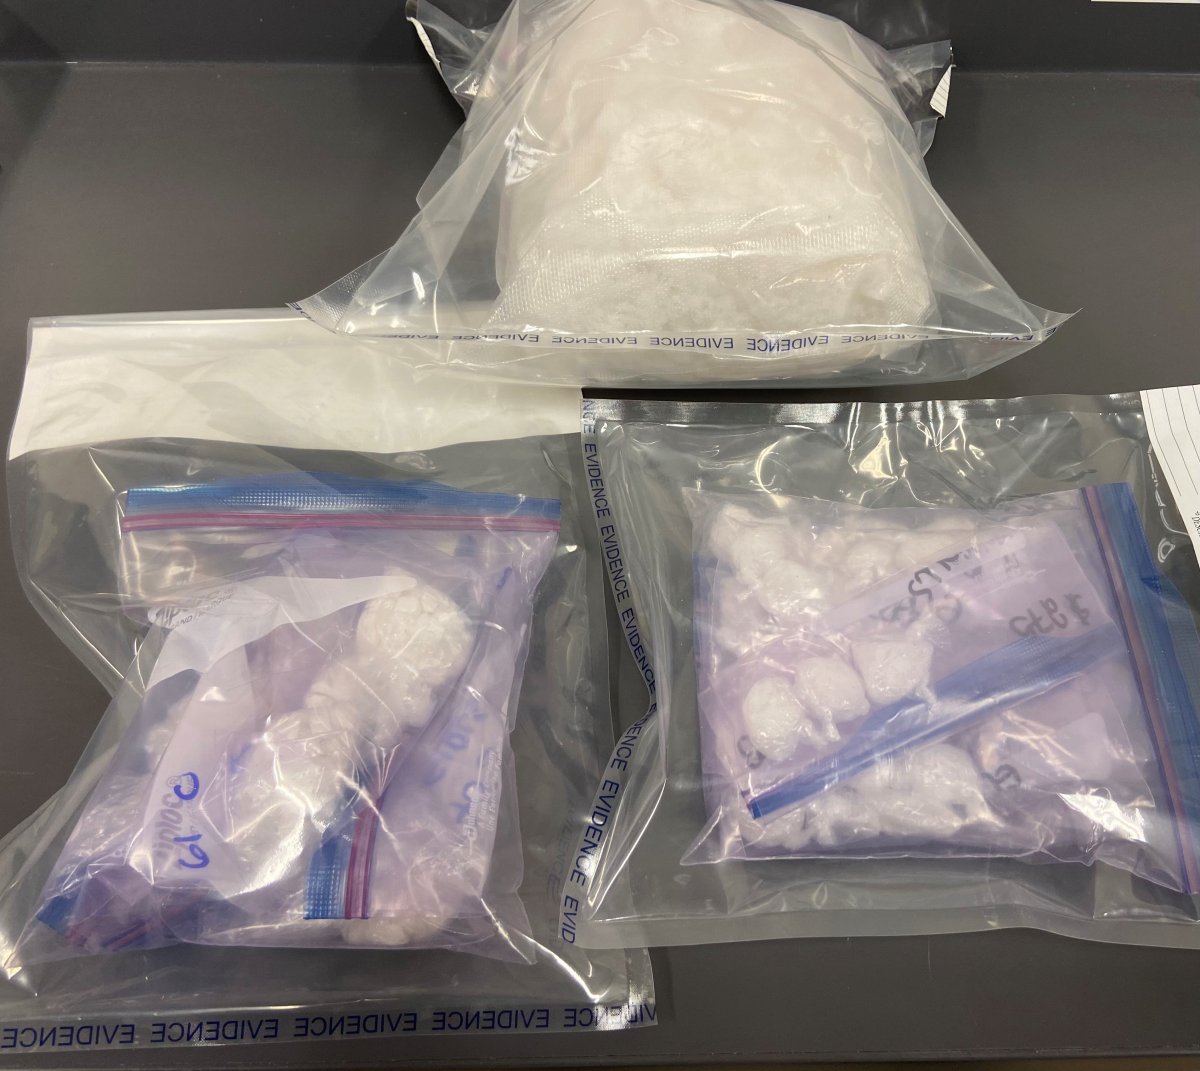 The Saskatchewan RCMP said they seized two kilograms of meth on Feb. 9, 2021, after stopping a speeding vehicle on Highway 16 near Maidstone.